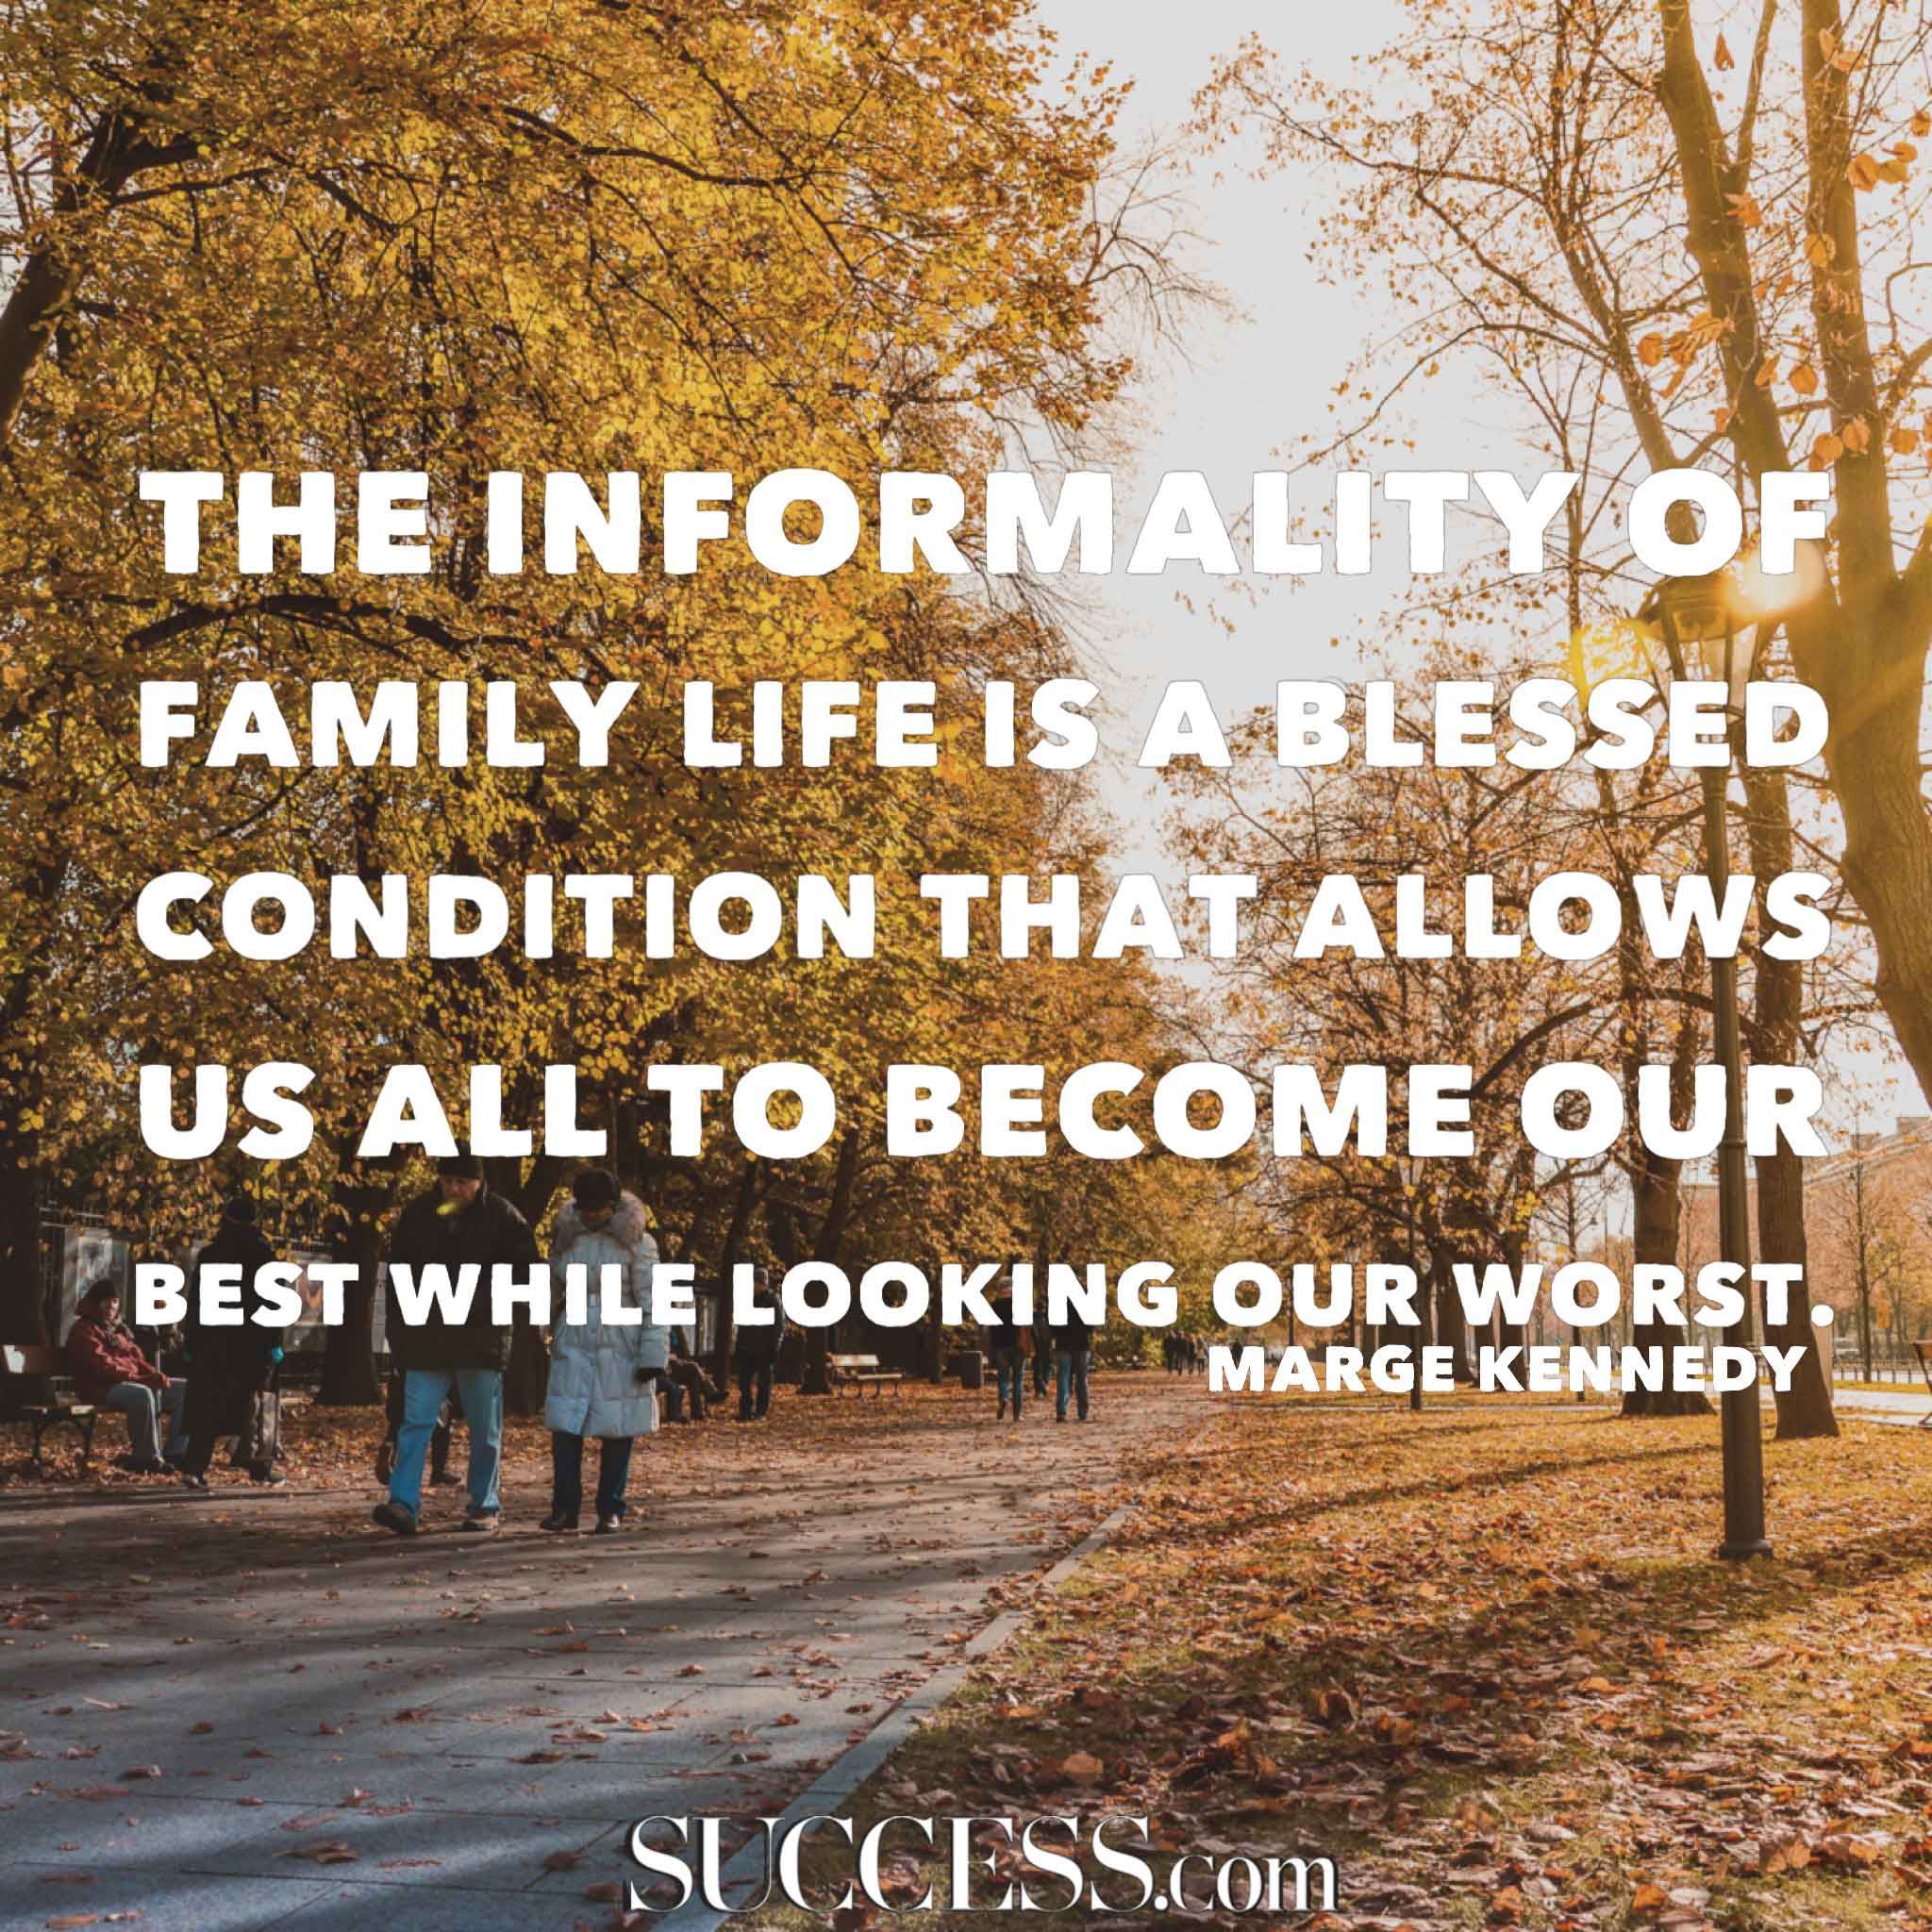 The informality of family life is a blessed condition that allows us all to become our best while looking our worst. Marge Kennedy